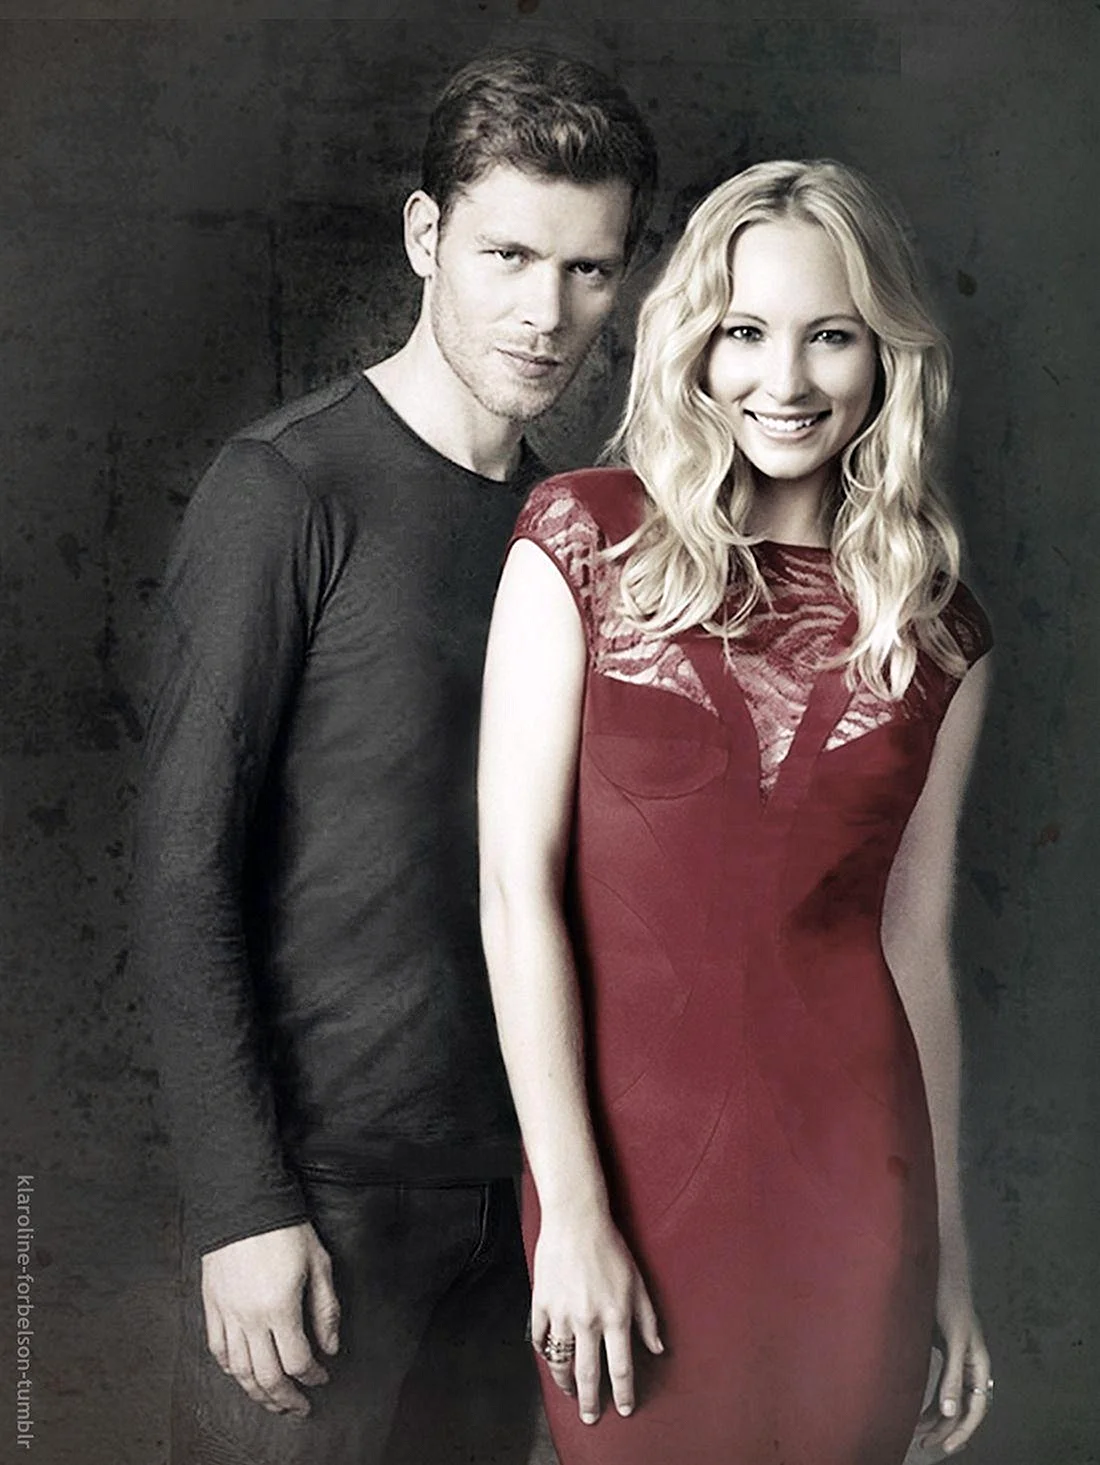 Candice King And Joseph Morgan Wallpaper For iPhone